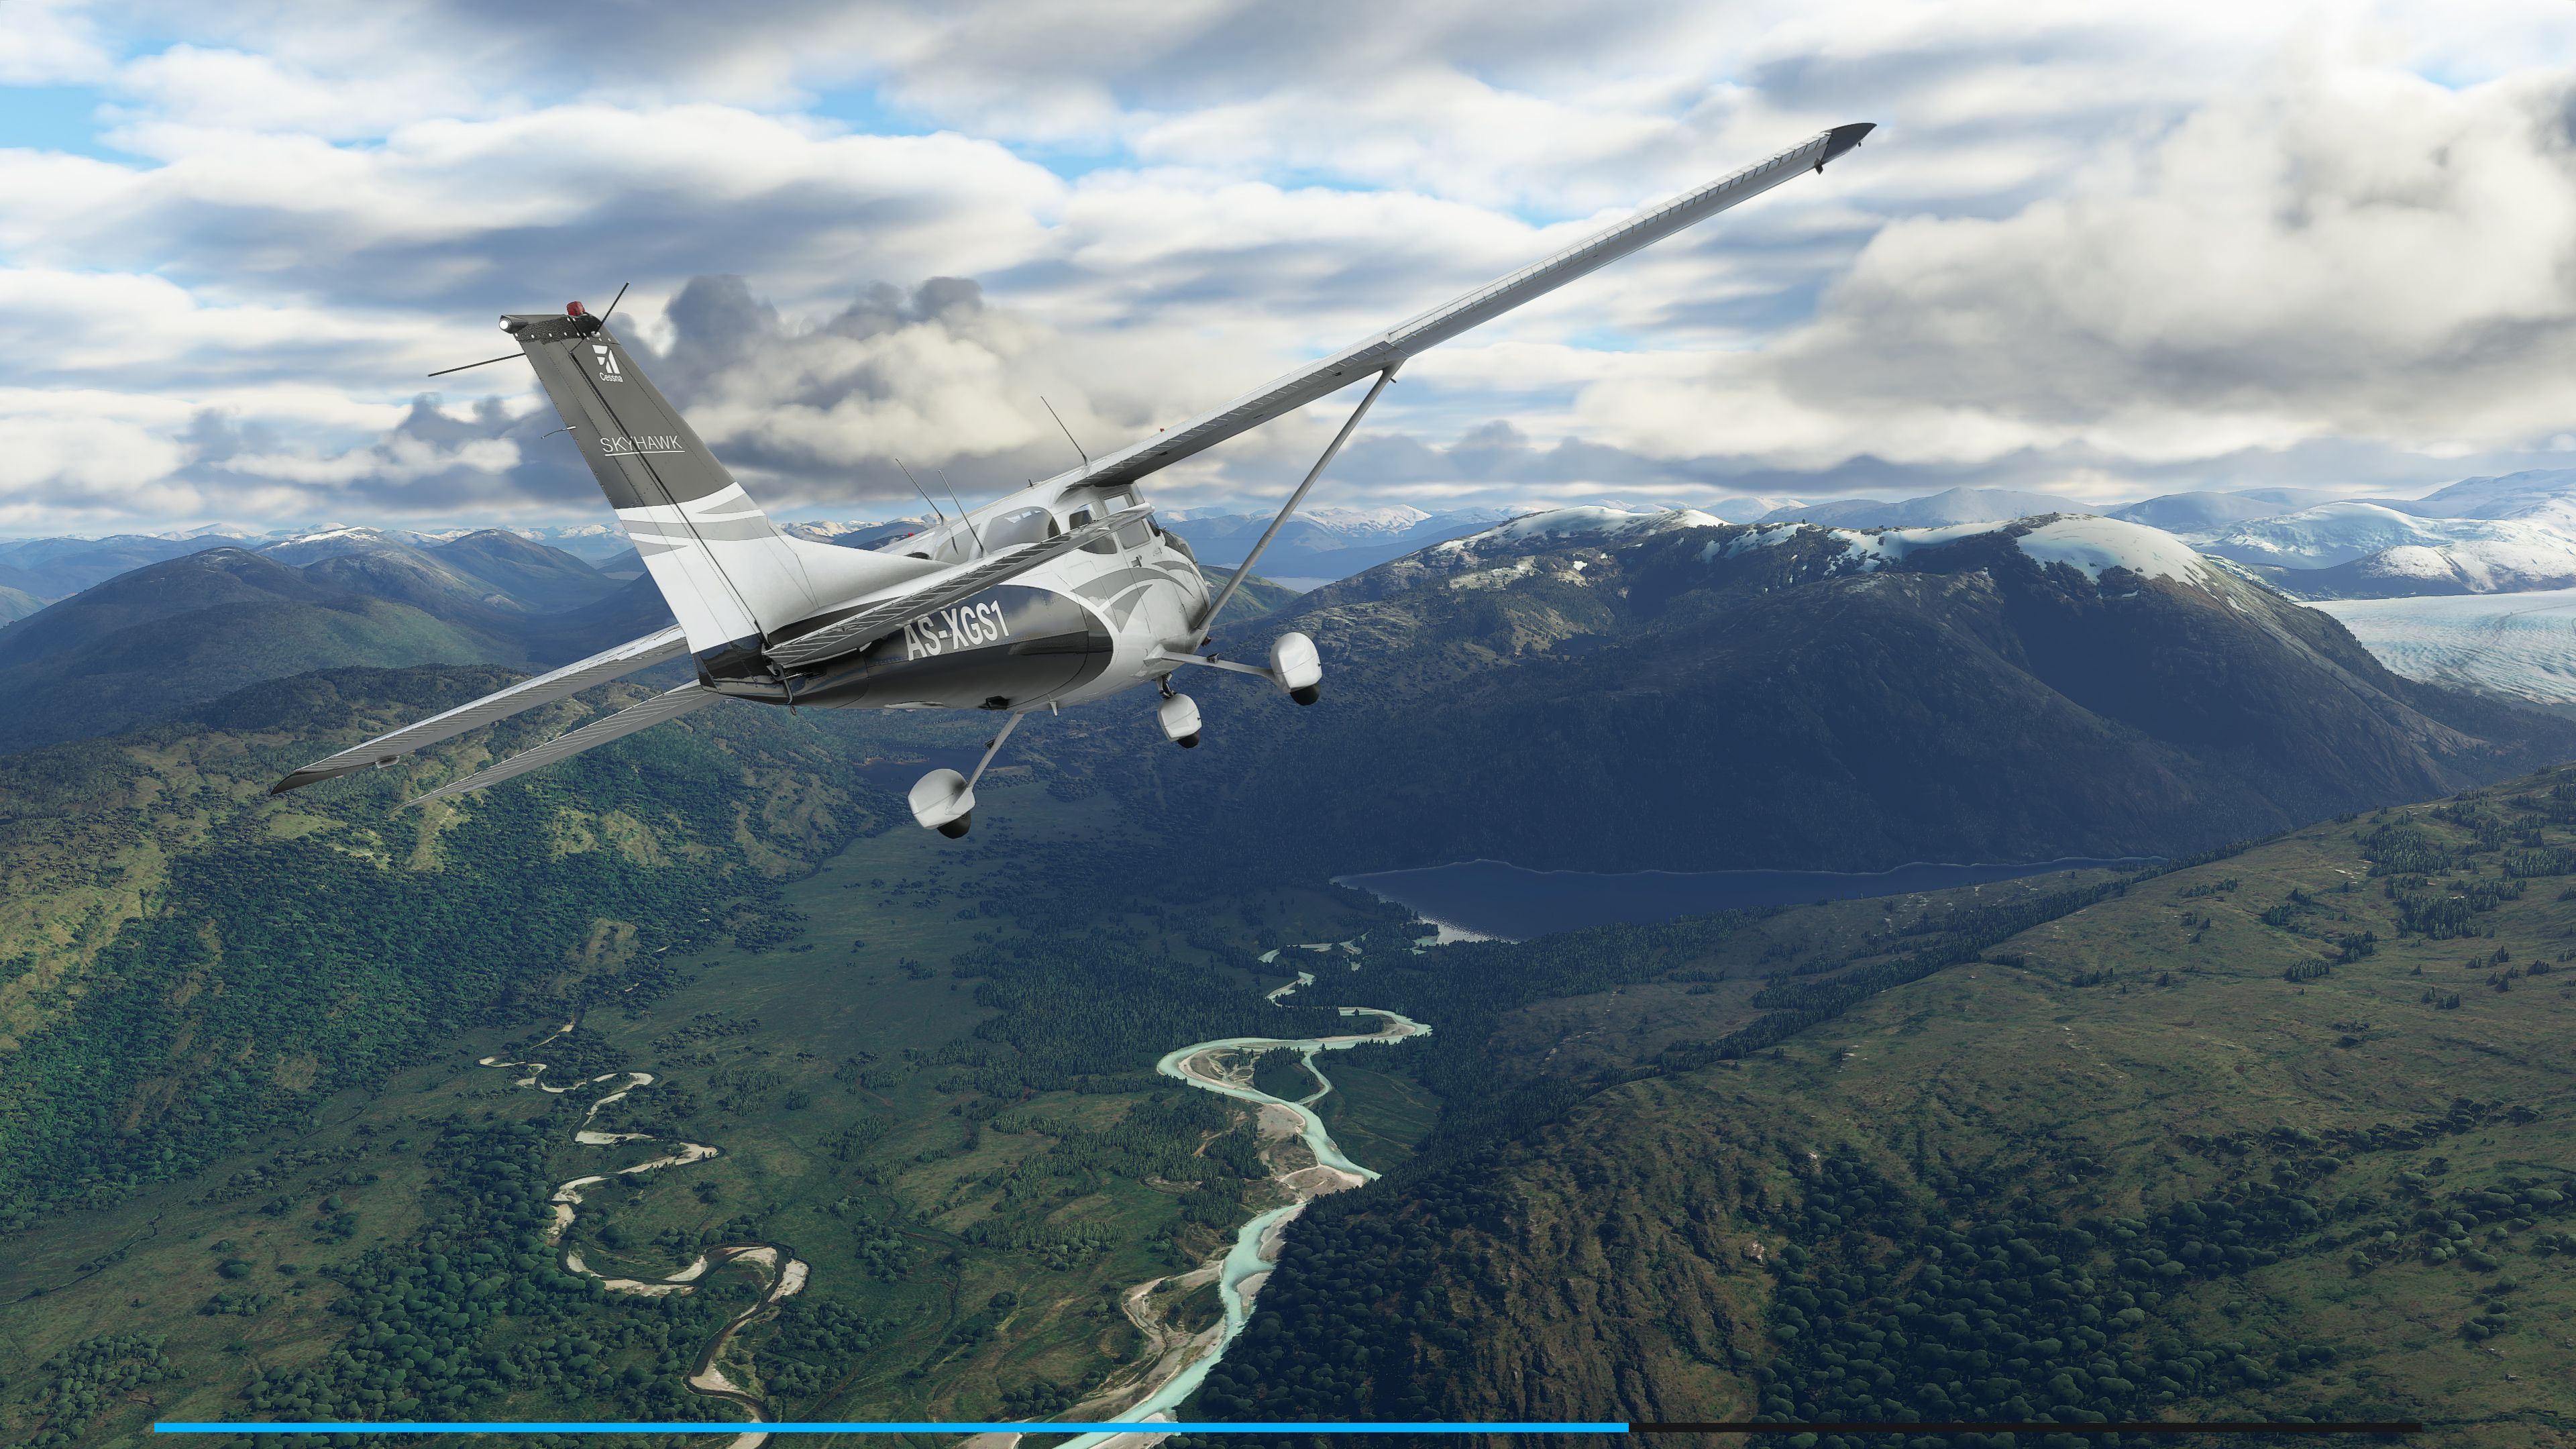 Microsoft Flight Simulator install size is 127GB, but you'll be